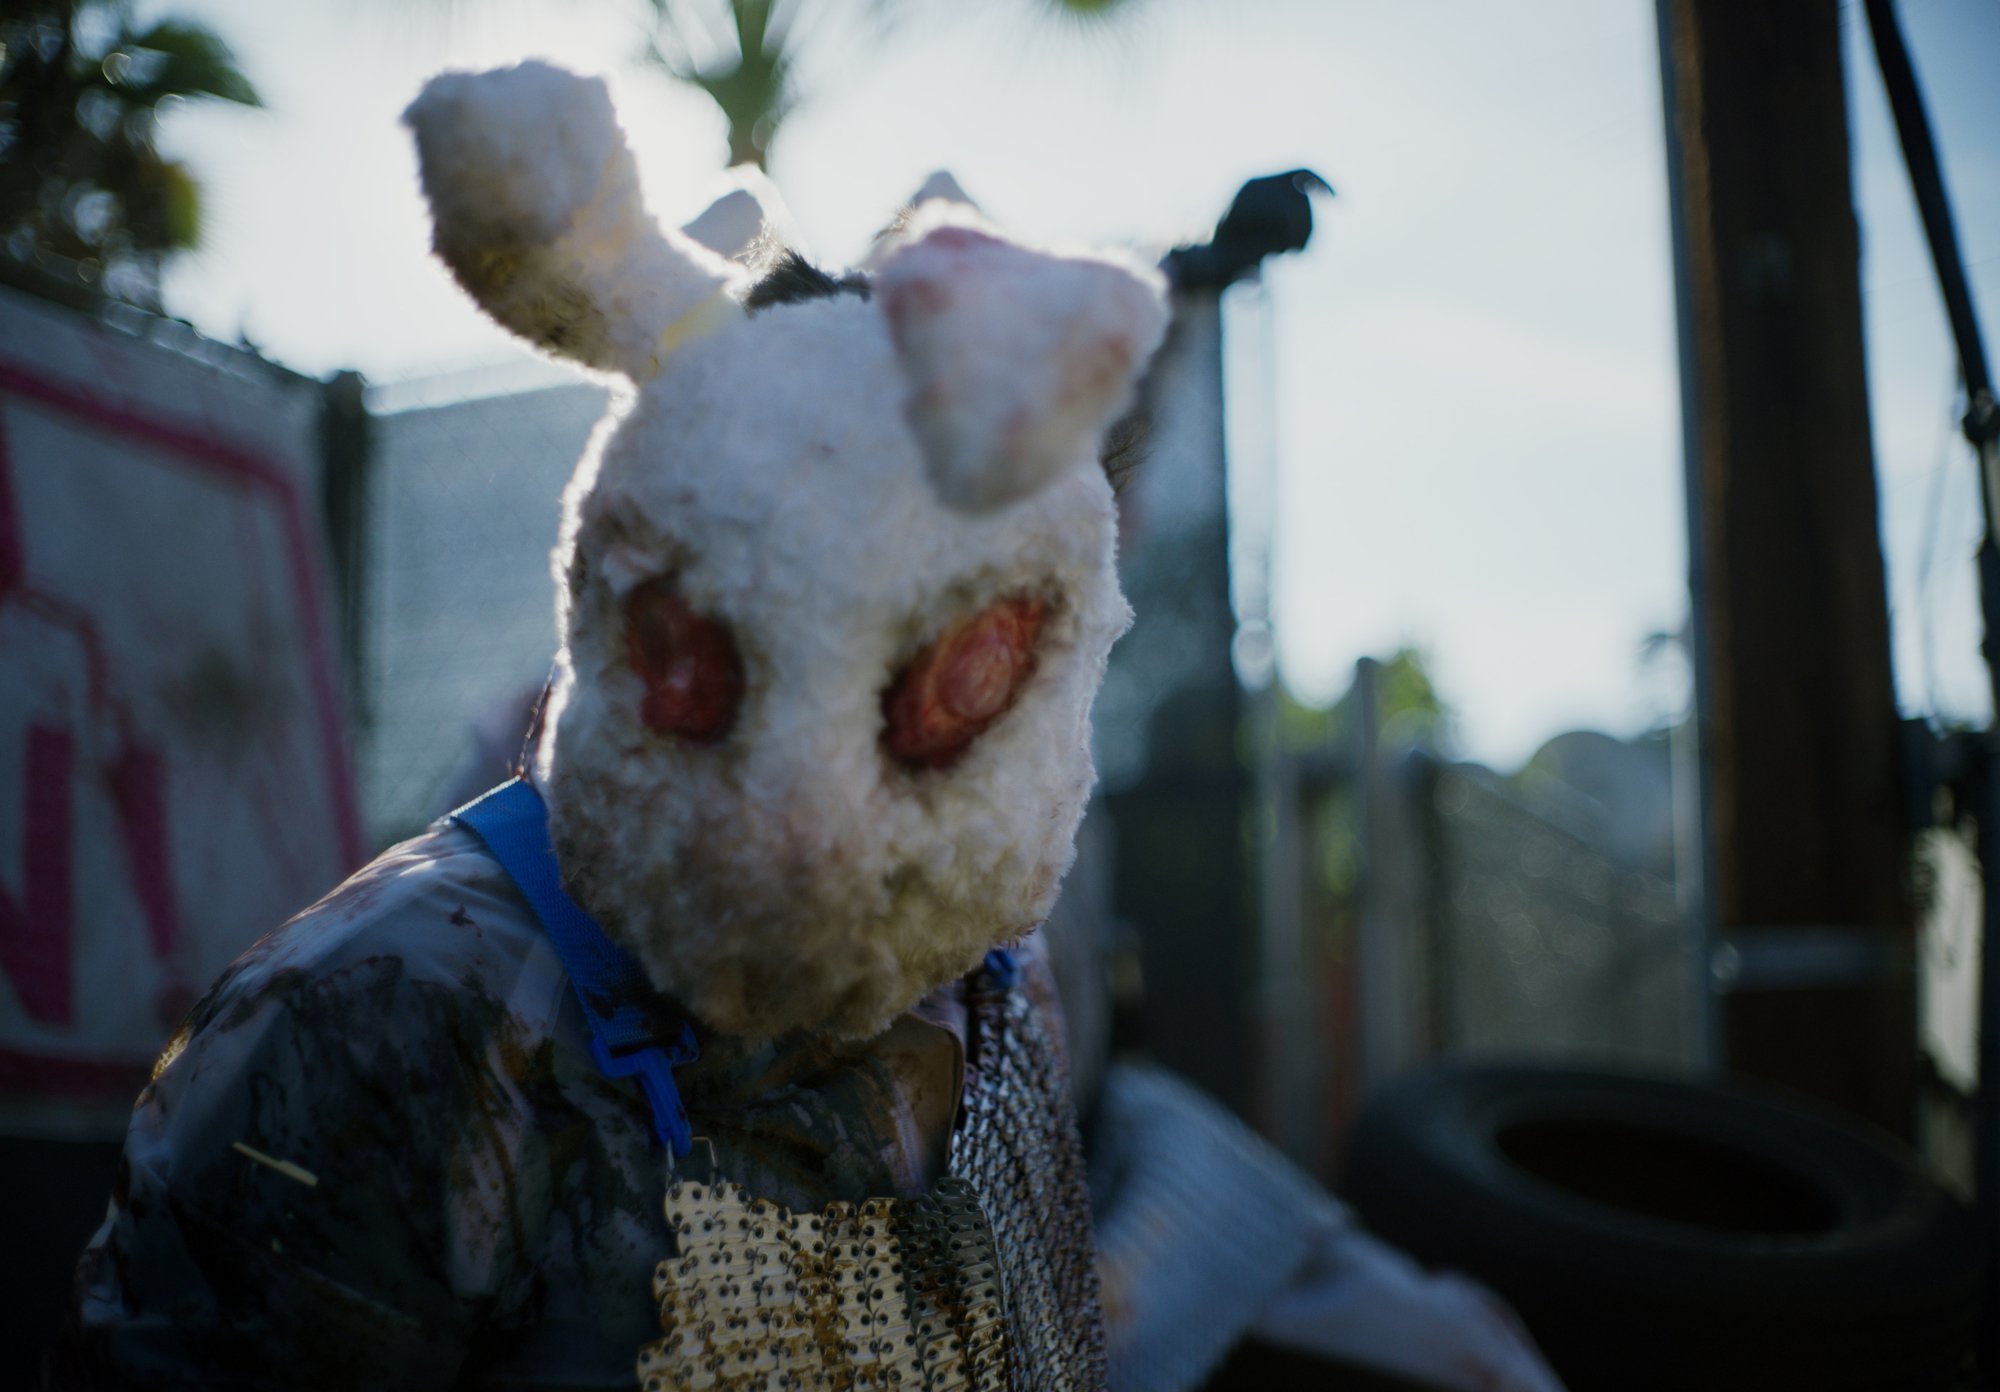 'The Forever Purge' bunny purgers